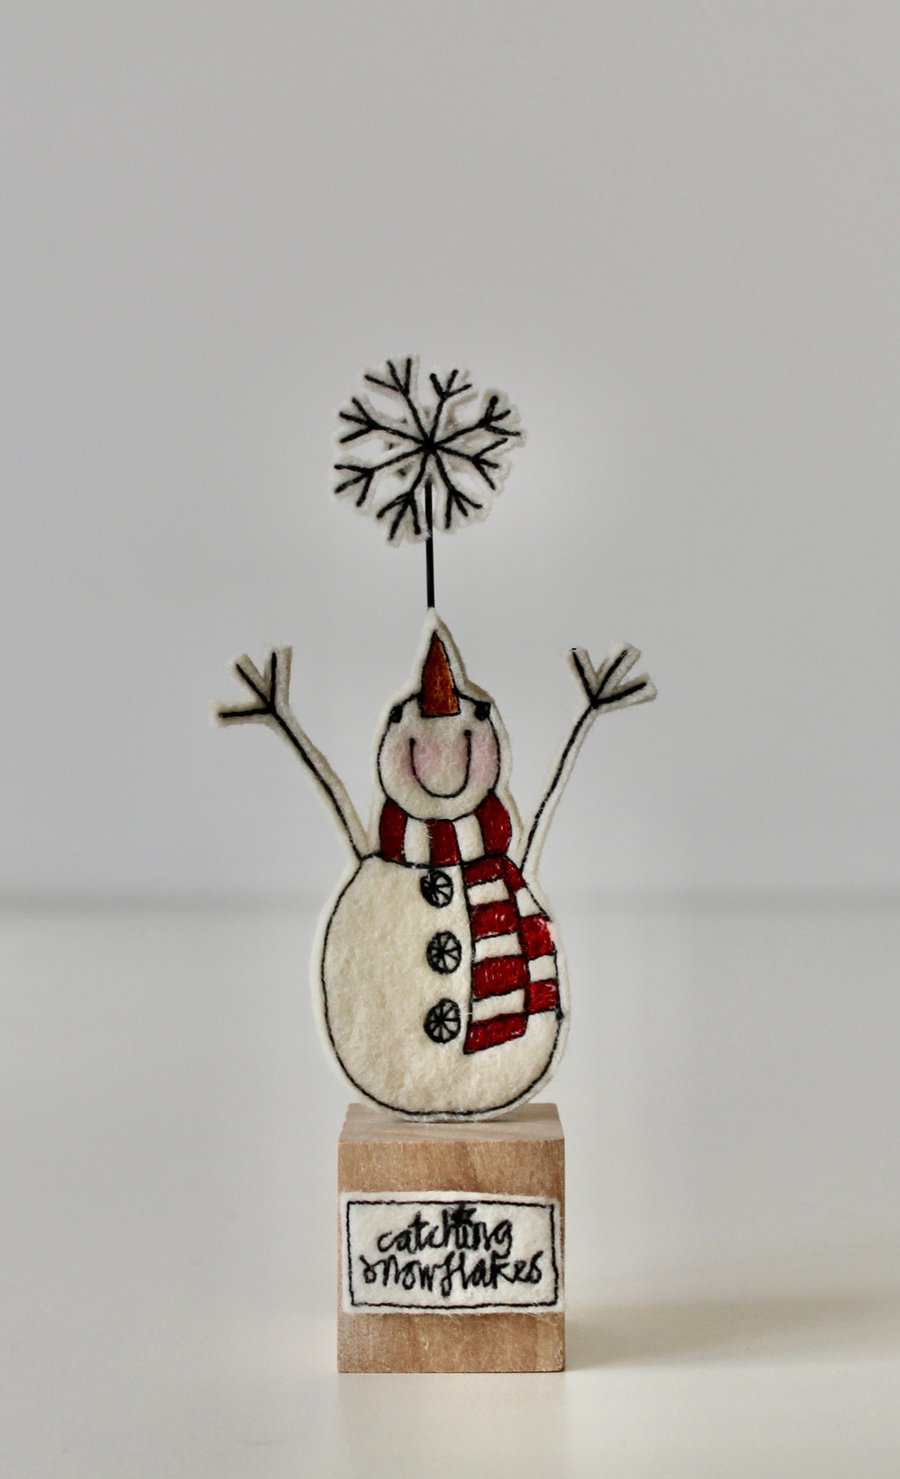 'Catching Snowflakes' - On the block Christmas Decoration